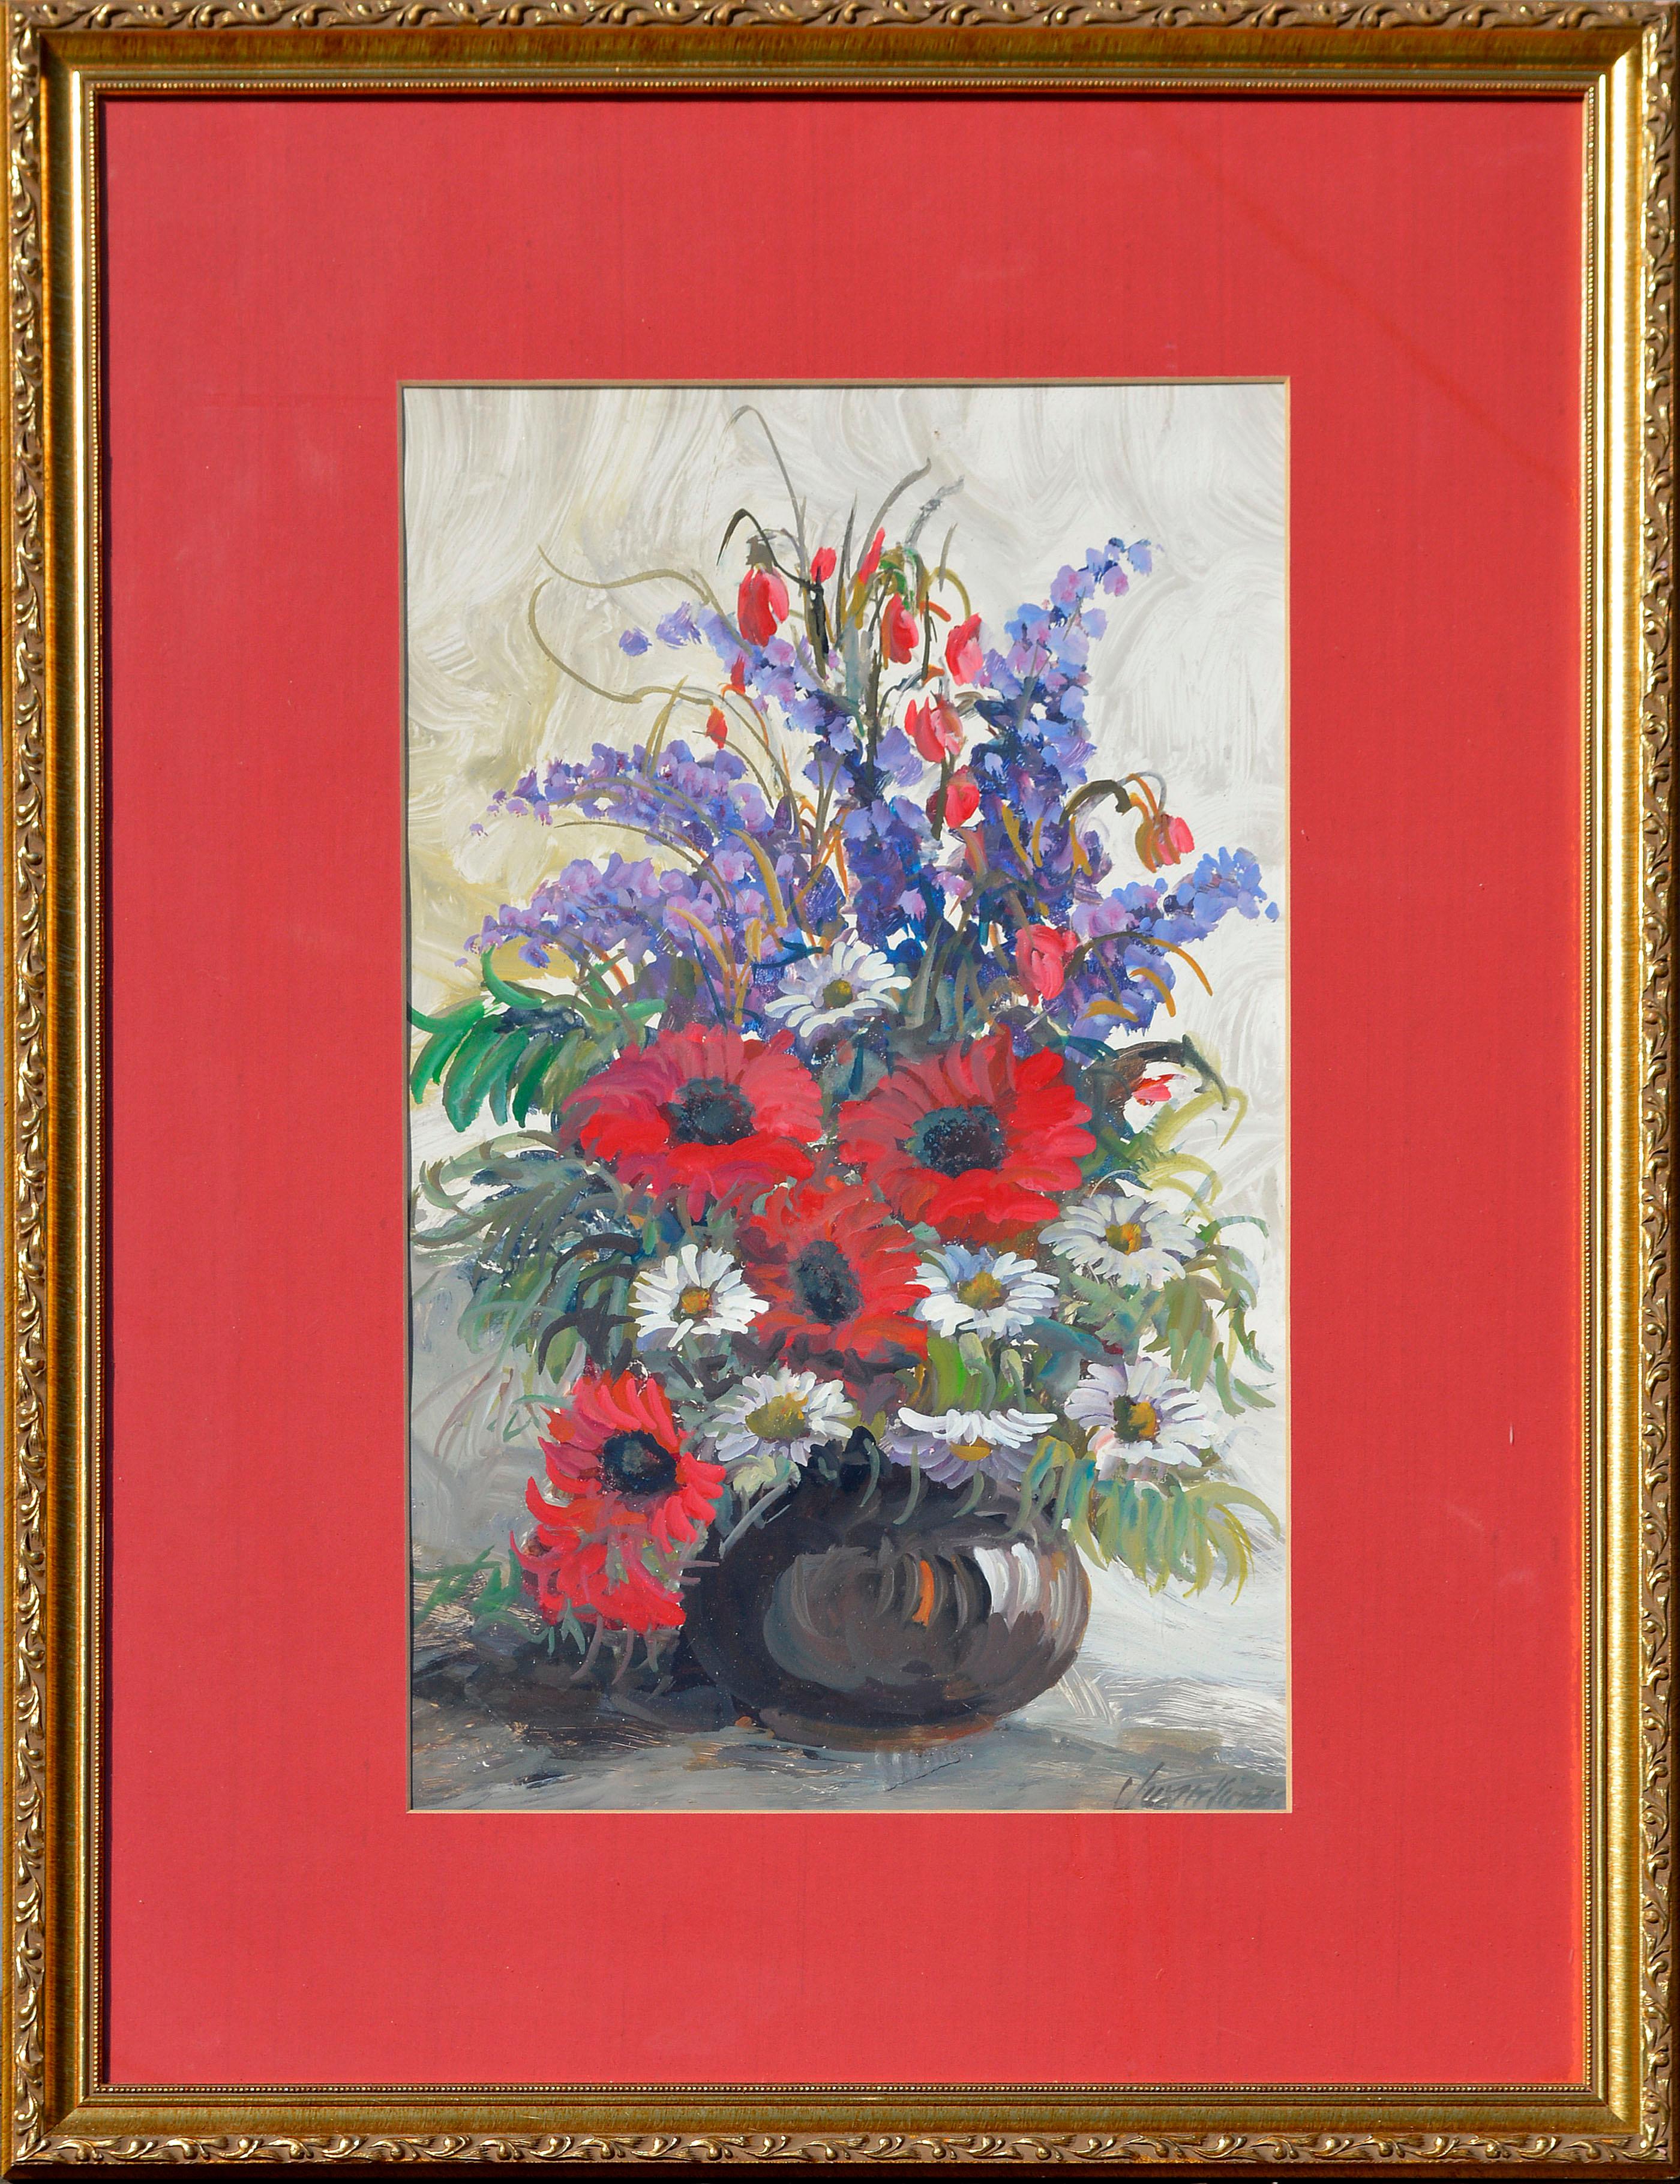 Delphinium, Daisies and Gerber Daisies - Red Floral Bouquet Still-Life 